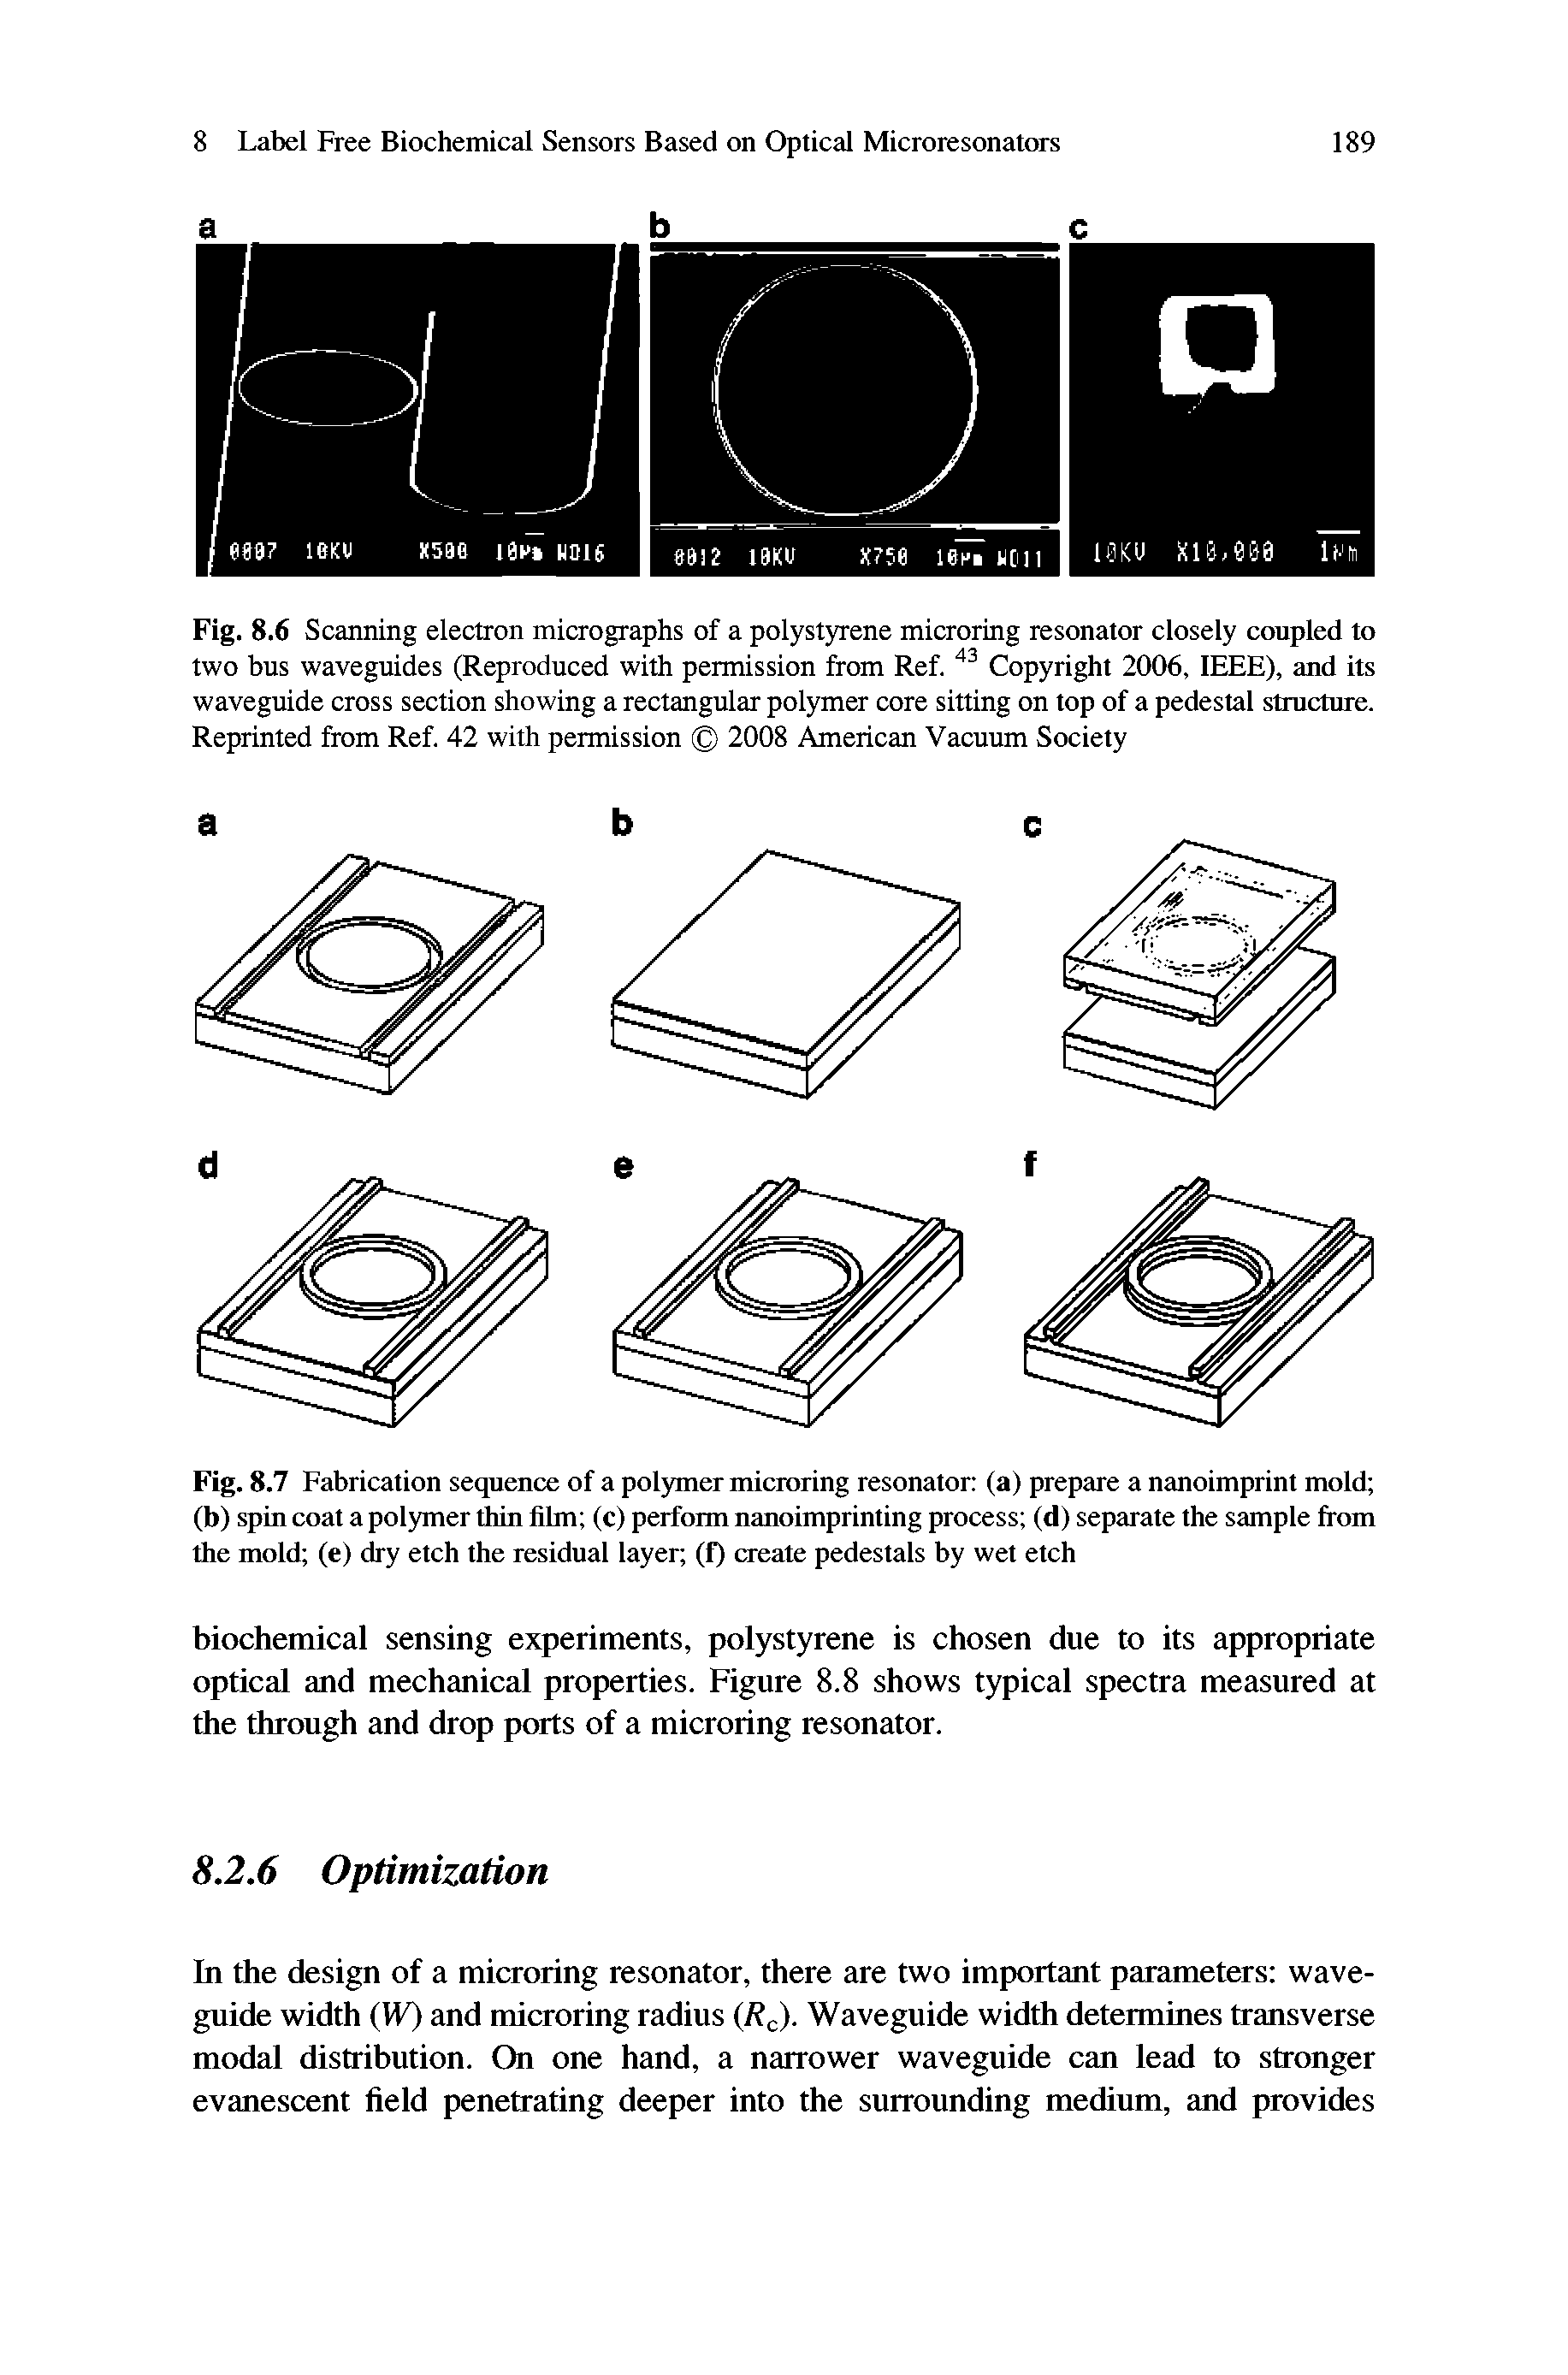 Fig. 8.6 Scanning electron micrographs of a polystyrene microring resonator closely coupled to two bus waveguides (Reproduced with permission from Ref. 43 Copyright 2006, IEEE), and its waveguide cross section showing a rectangular polymer core sitting on top of a pedestal structure. Reprinted from Ref. 42 with permission 2008 American Vacuum Society...